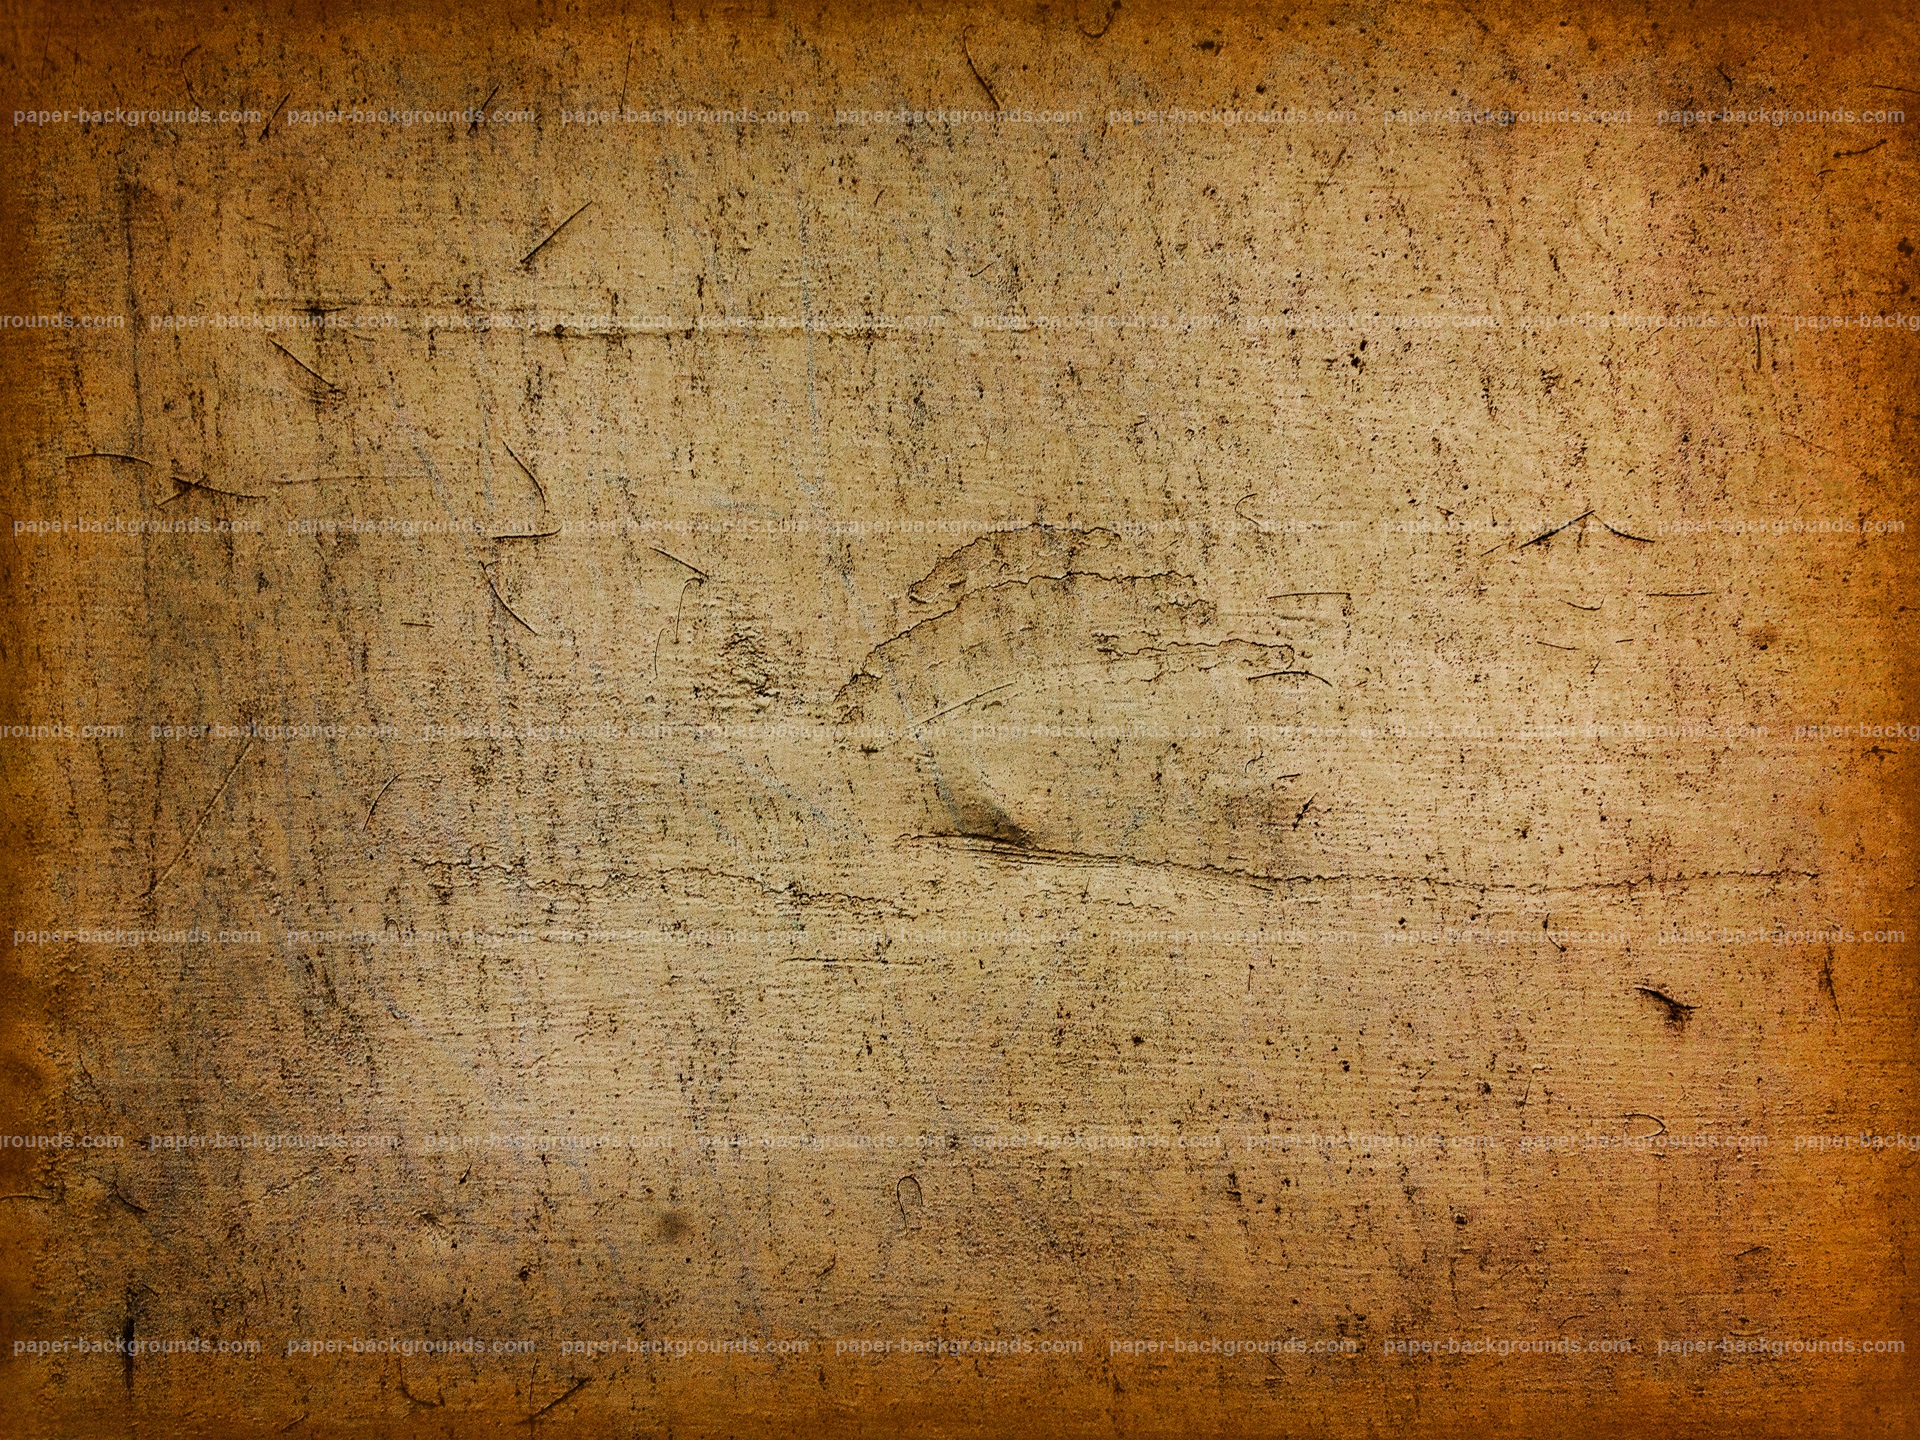 Old Yellow Vintage Background Texture Full Hd 1920 X 1280 Pixels HD